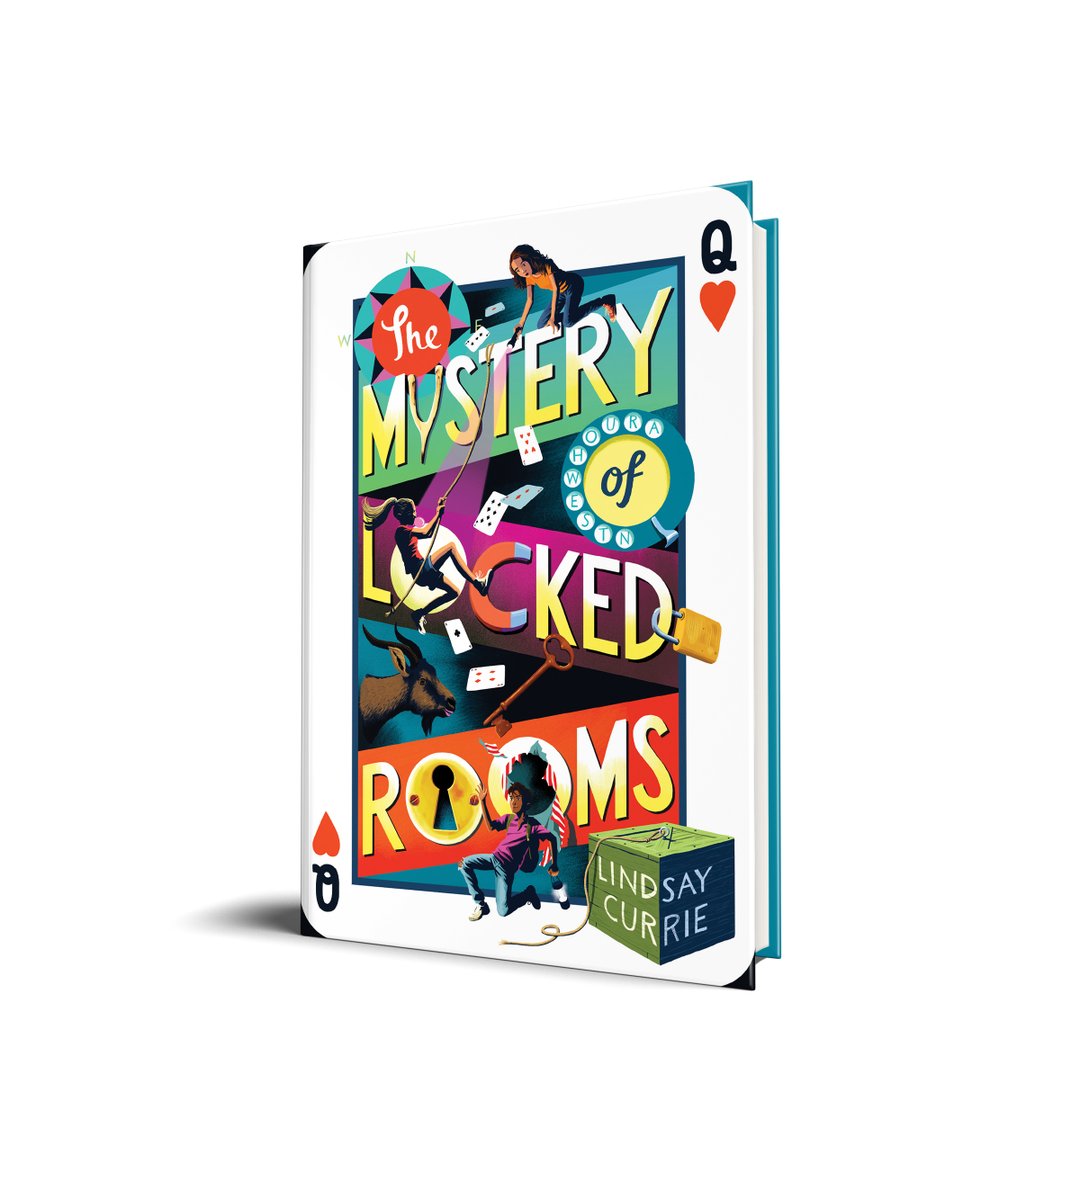 Sending so much love to all the educators, booksellers, and reviewers who are taking time to read and review early copies of THE MYSTERY OF LOCKED ROOMS. Best holiday gift, ever! Thank you, friends!